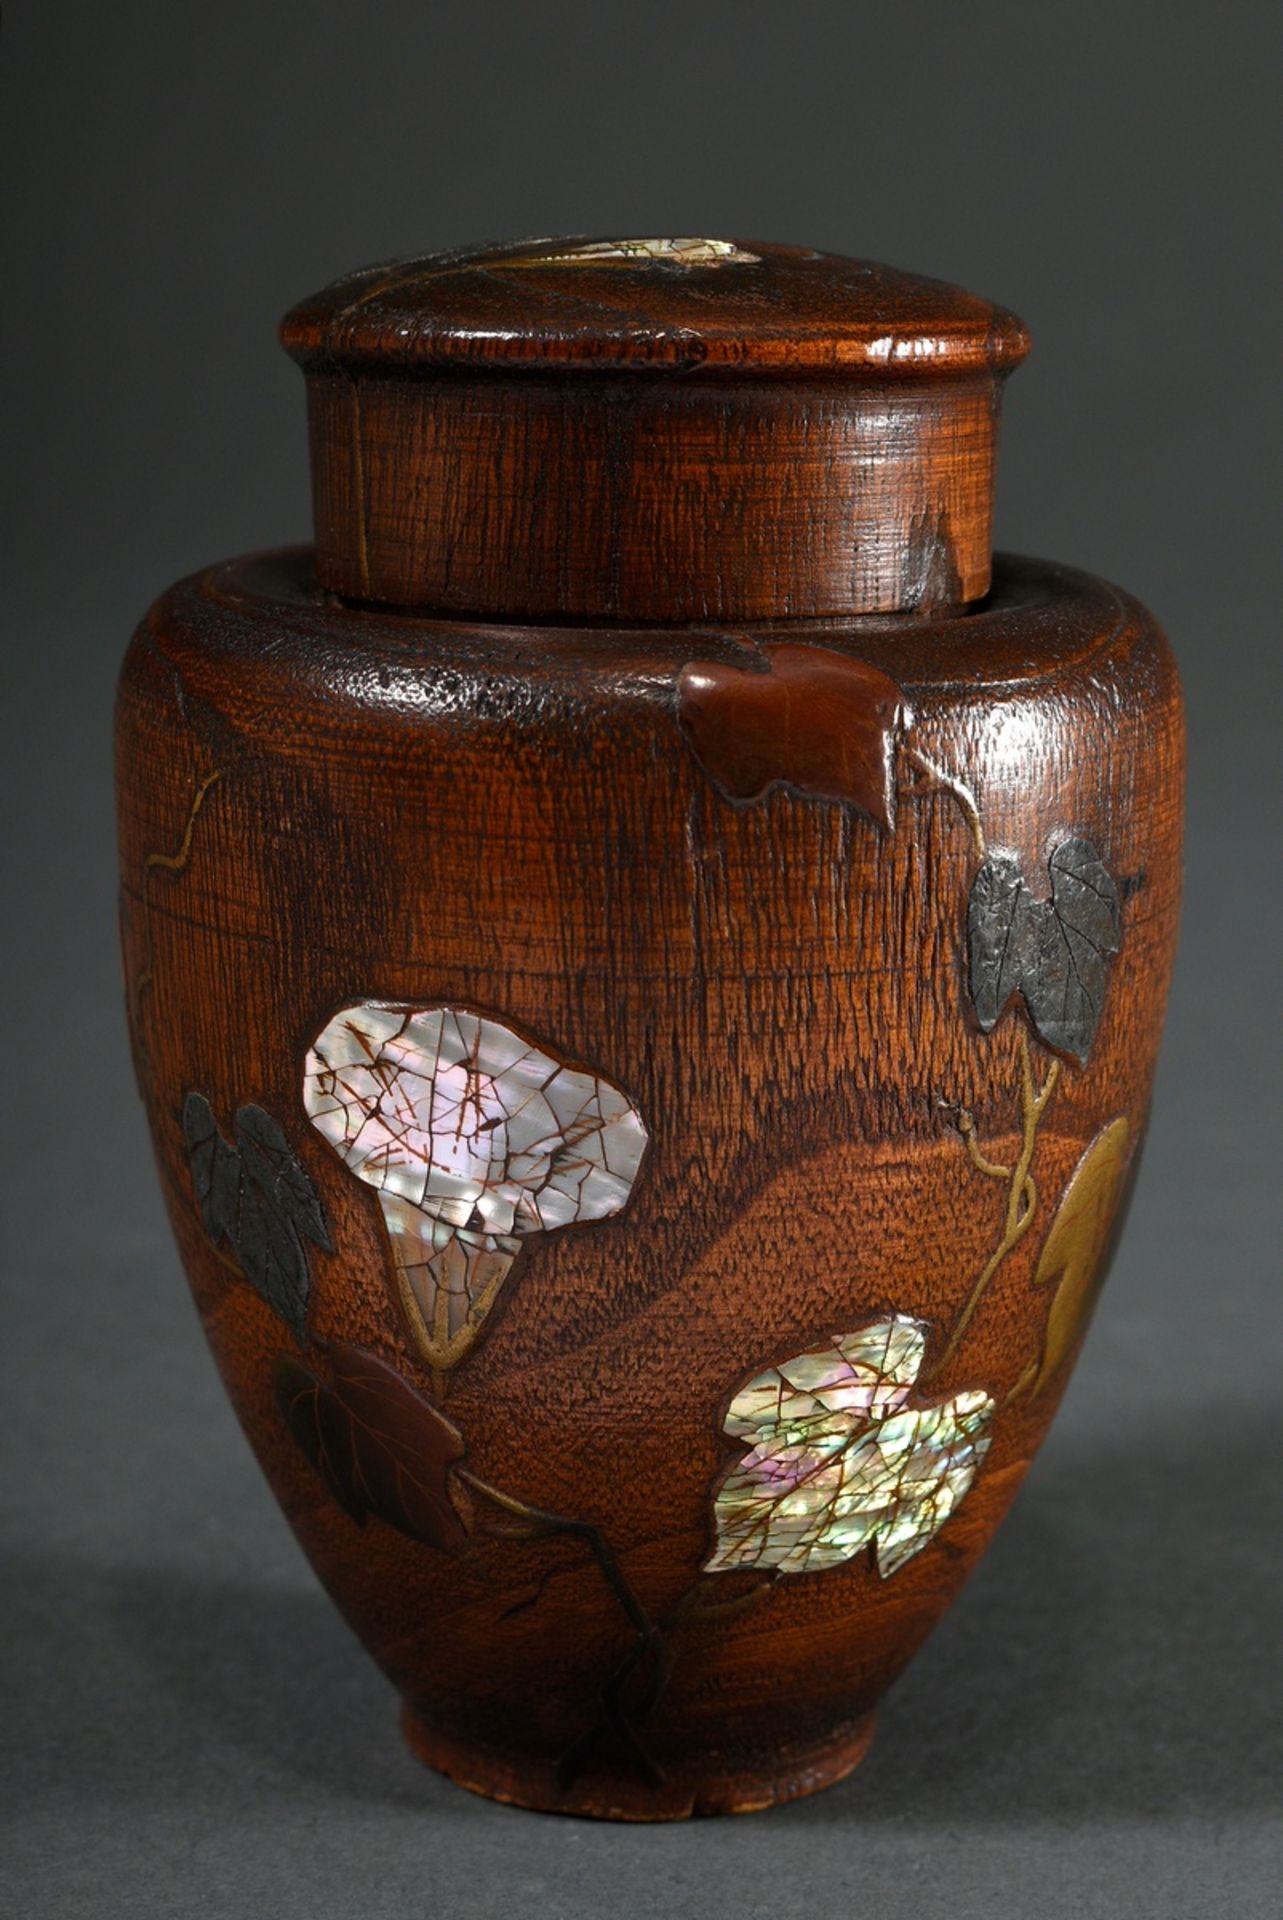 Japanese bamboo "Natsume" tea caddy with Takamaki-e lacquer decor and mother-of-pearl inlays "winch